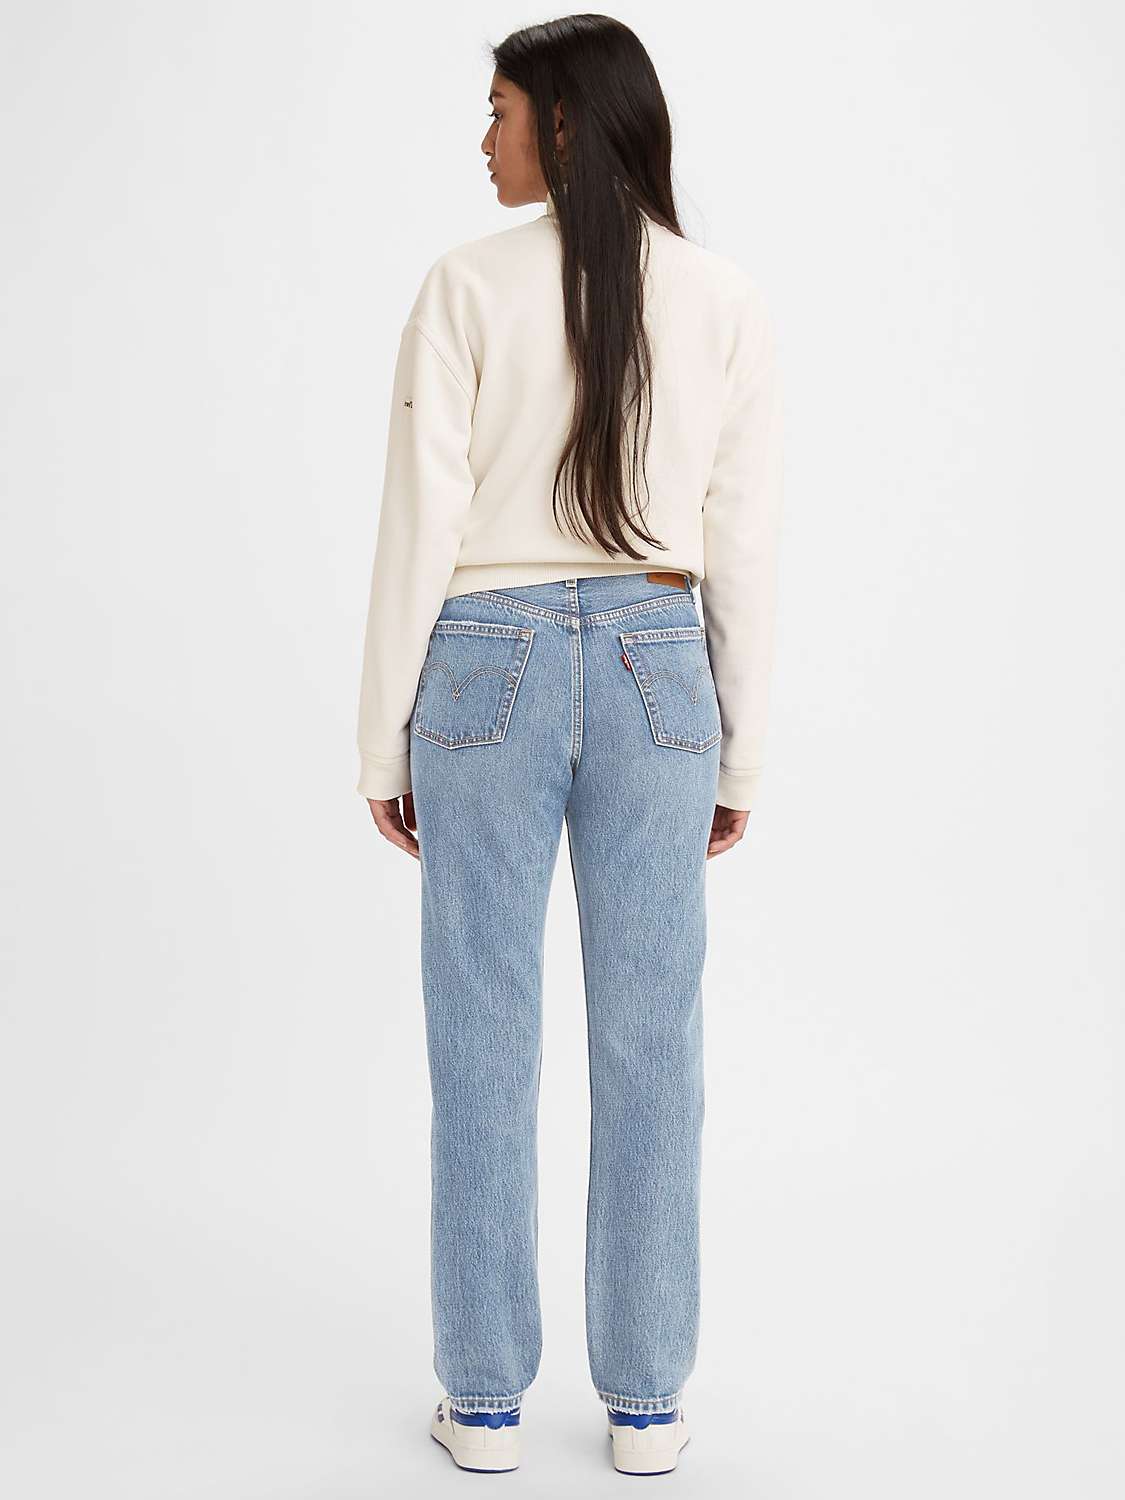 Buy Levi's 501 Straight Cut Jeans, Hollow Days Online at johnlewis.com